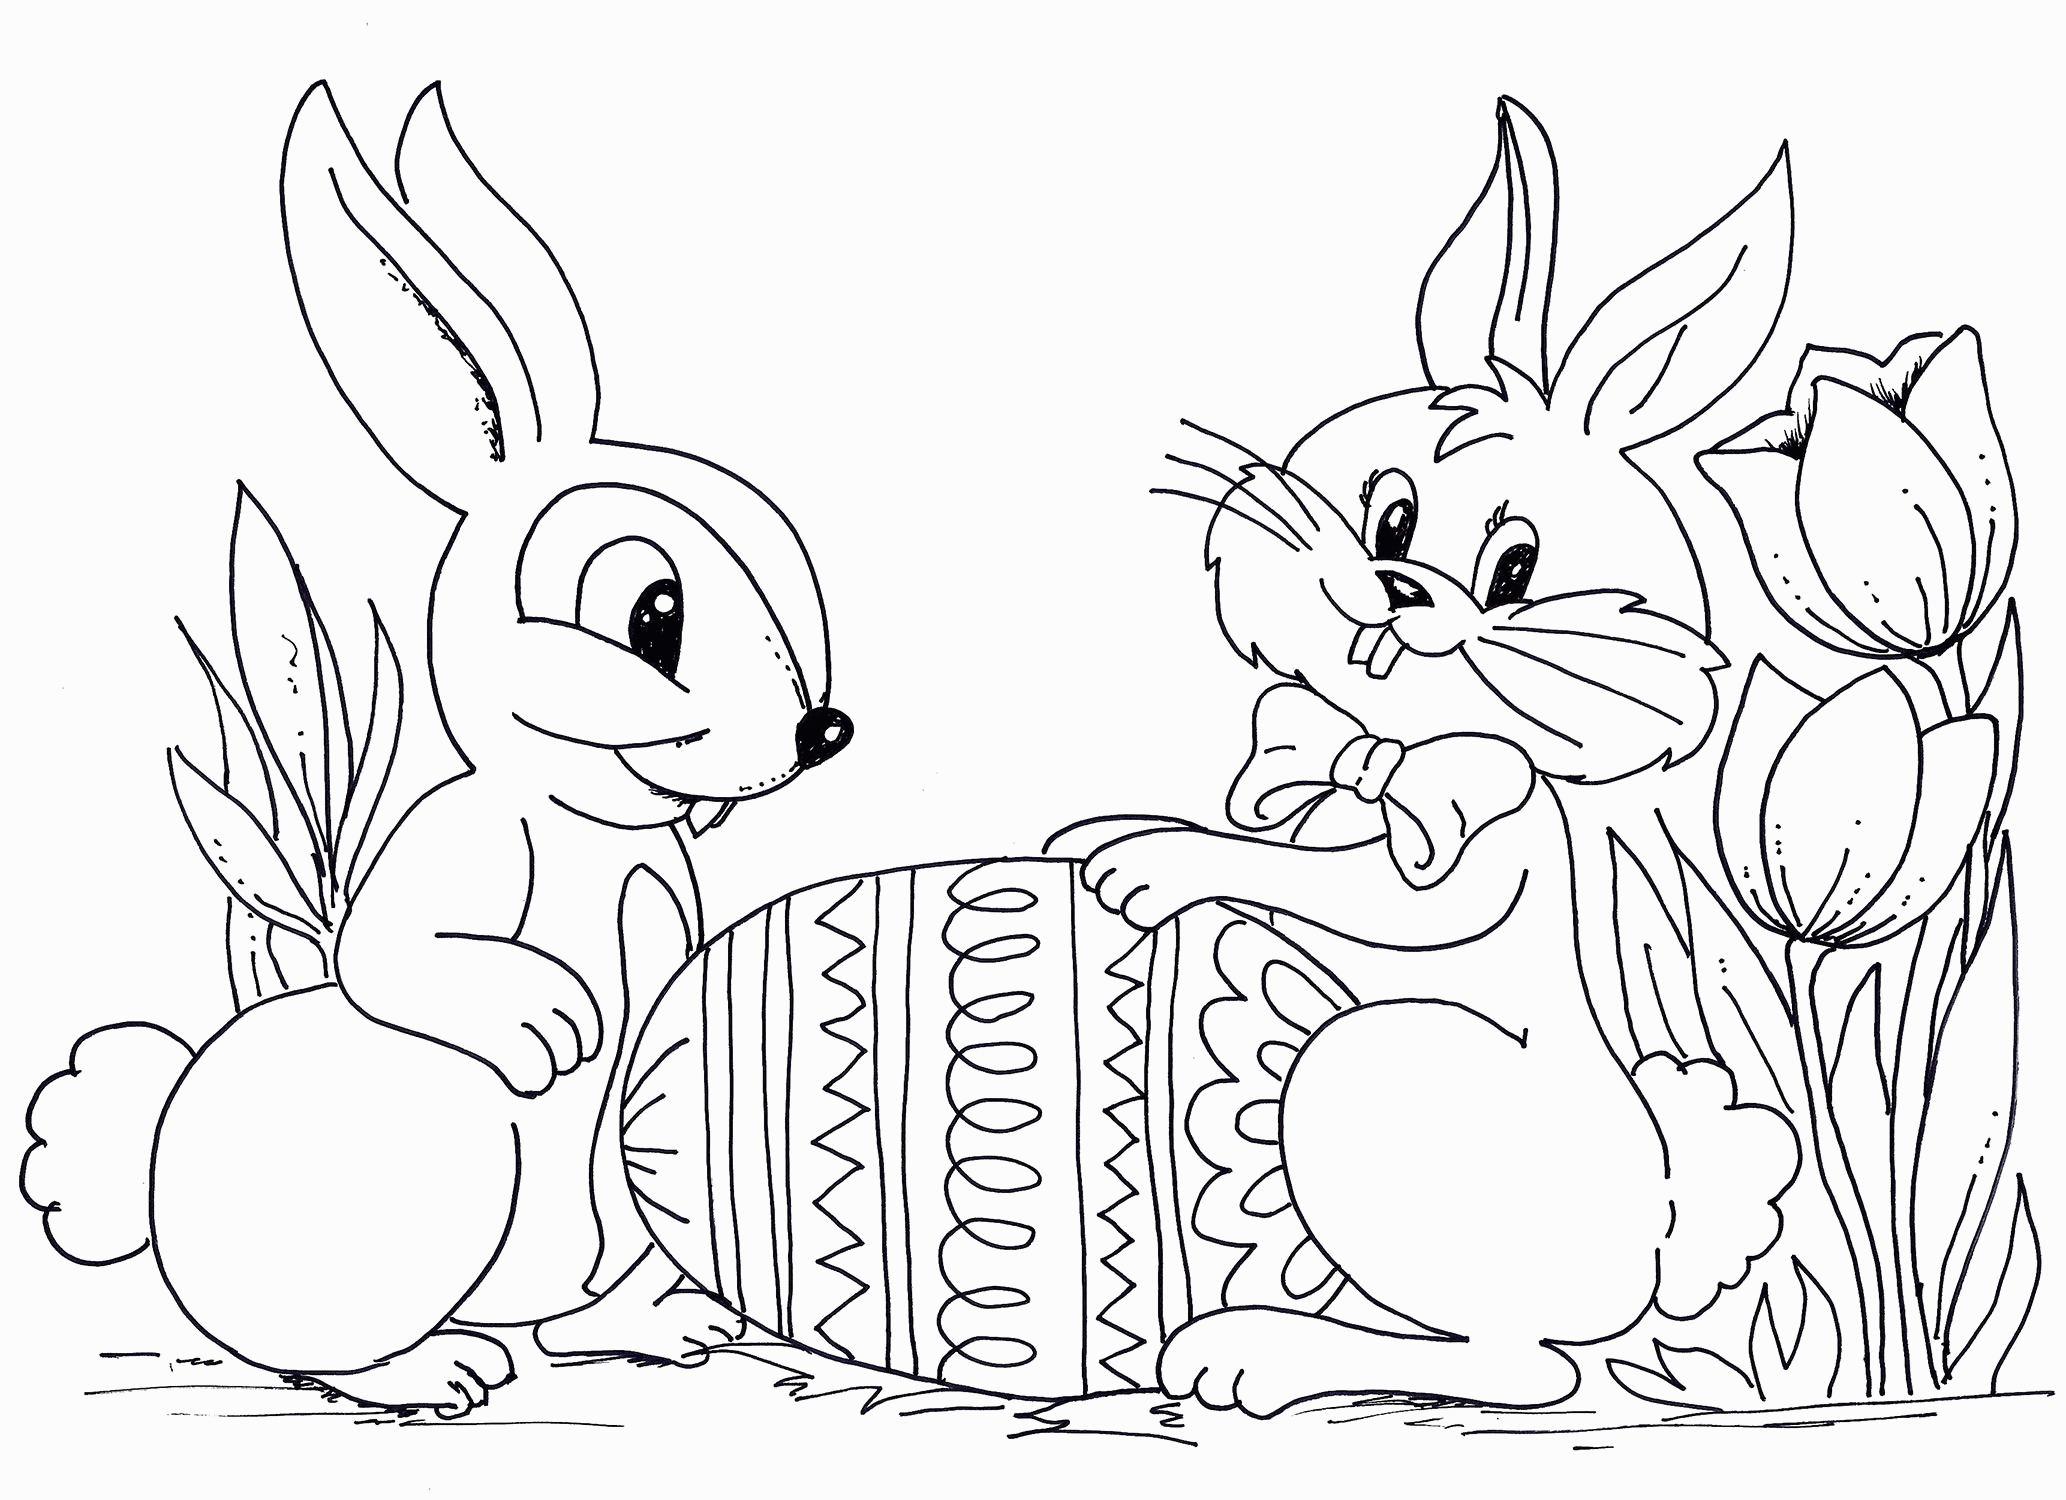 Easter Coloring Pages and Silhouettes to Download | CreativityWindowâ¢